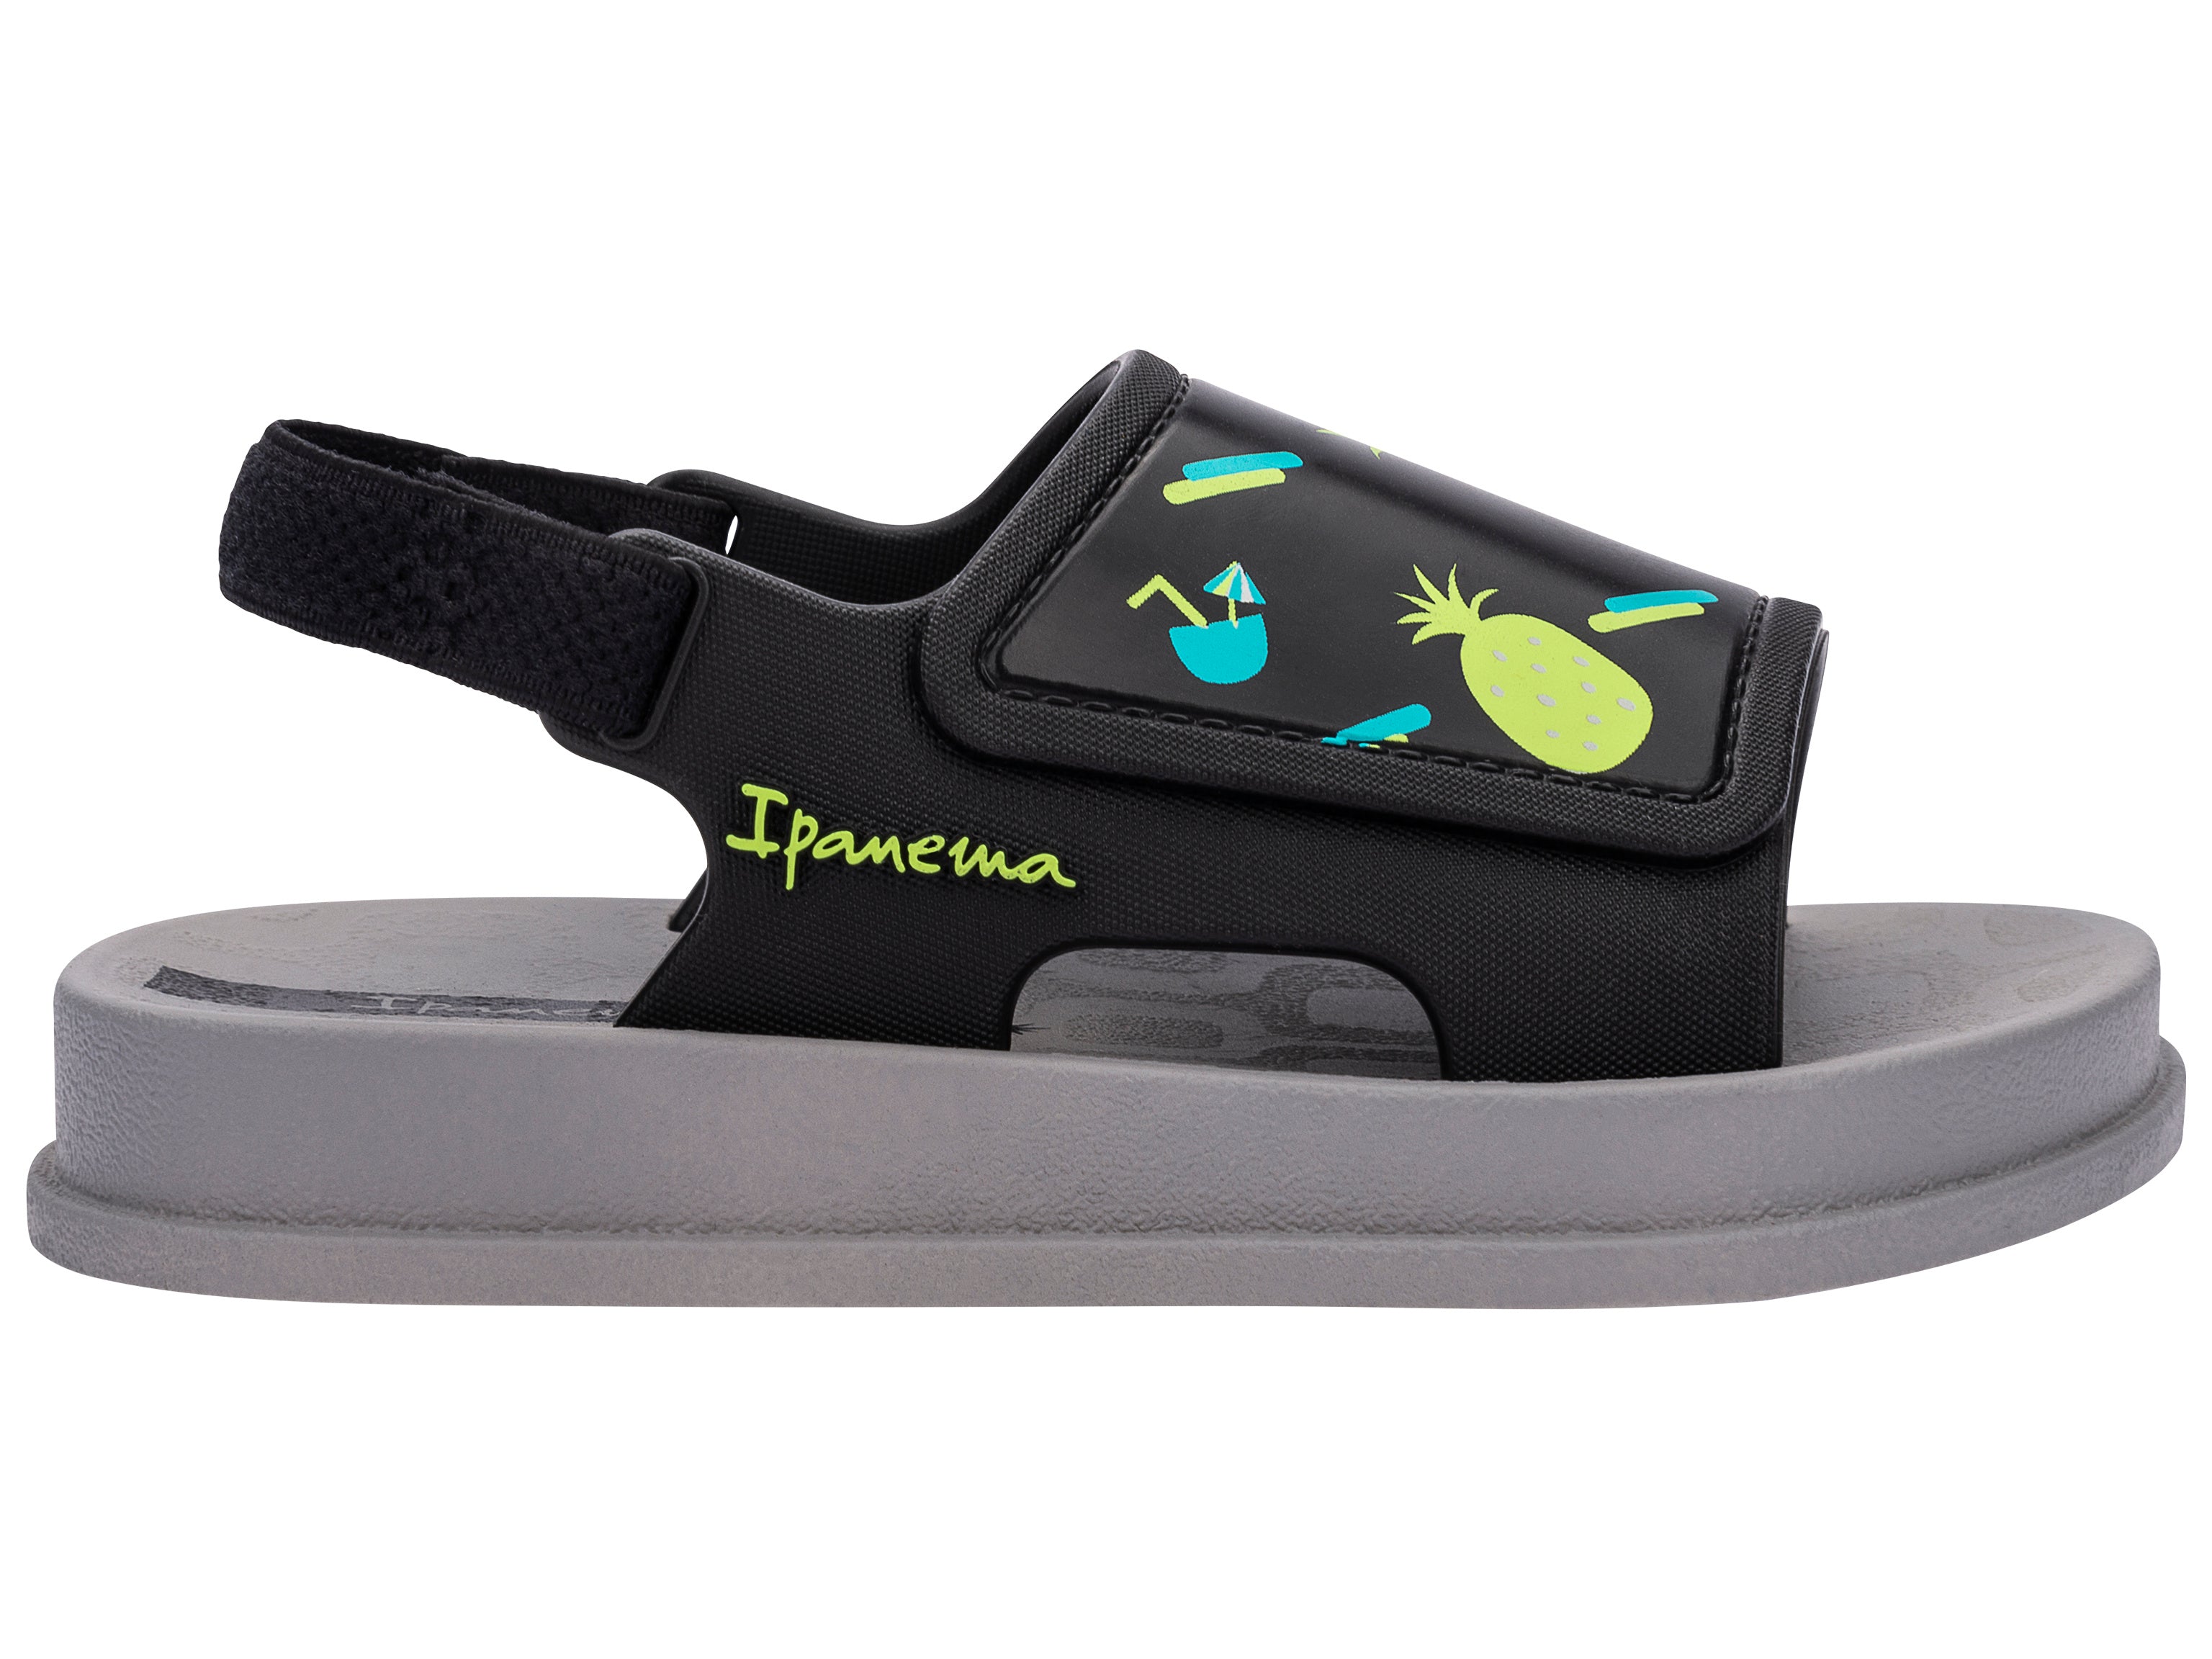 Outer side view of a grey Ipanema Soft baby sandal with fruit print on the black upper.